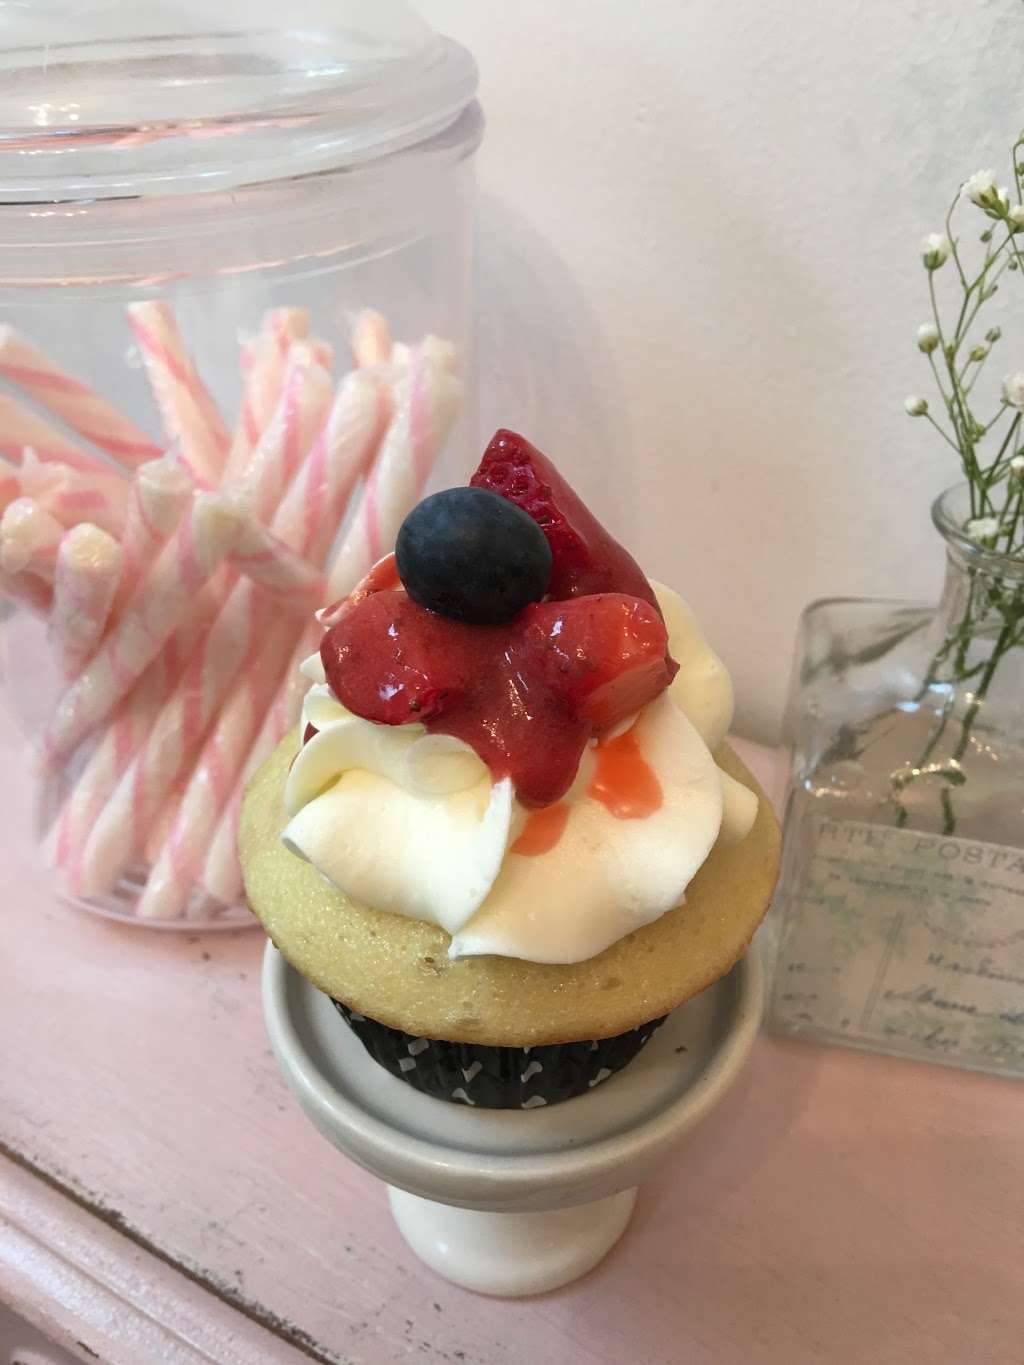 Pretty Tasty Cupcake Boutique | Carpenters Square Mall,, 31 Perry St, Cape May, NJ 08204 | Phone: (609) 827-1346